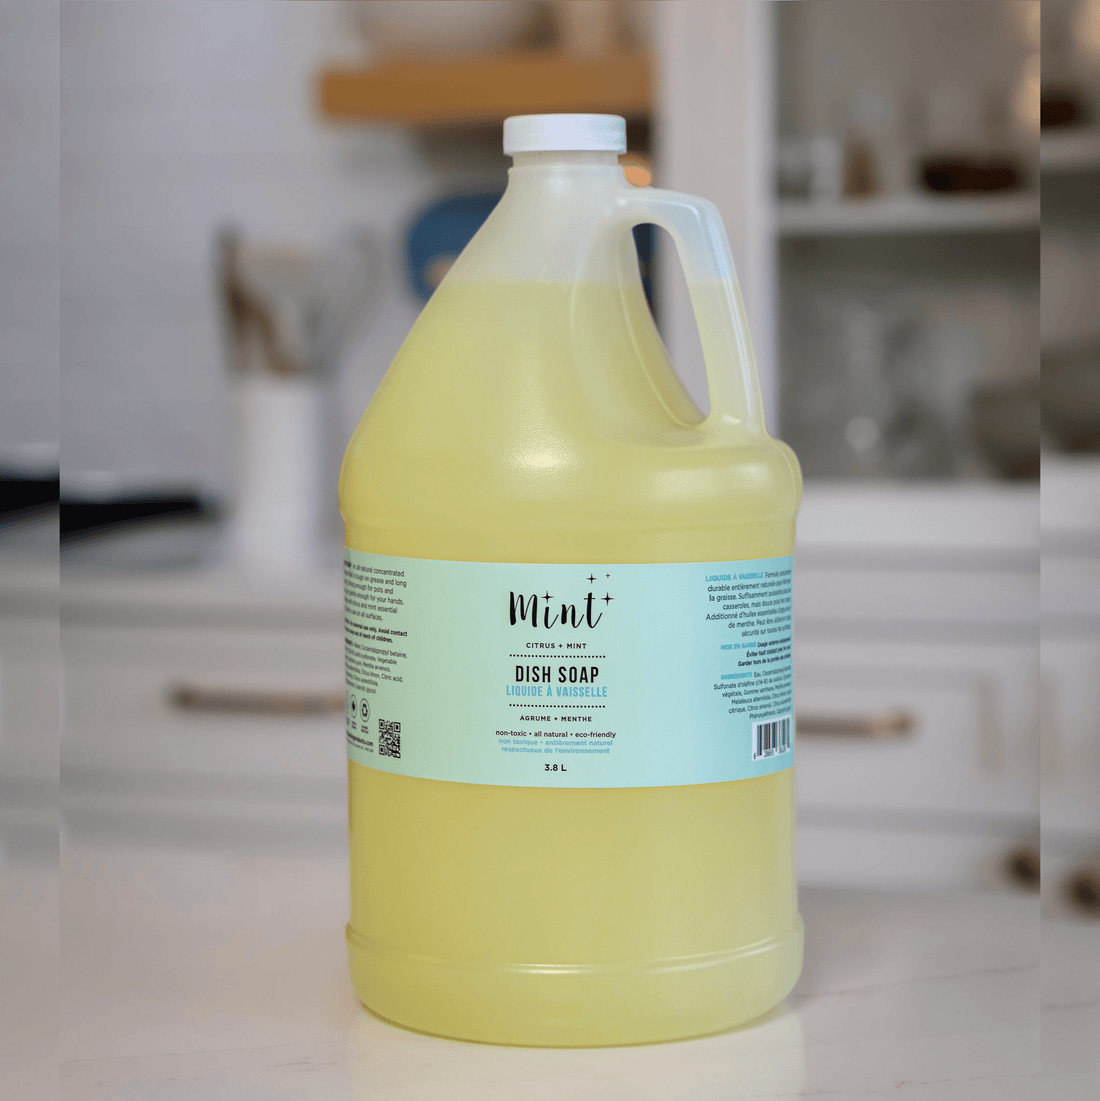 Mint Dish Soap in a 3.8L recyclable jug placed on a kitchen counter. The label highlights its natural, eco-friendly ingredients and citrus mint scent.